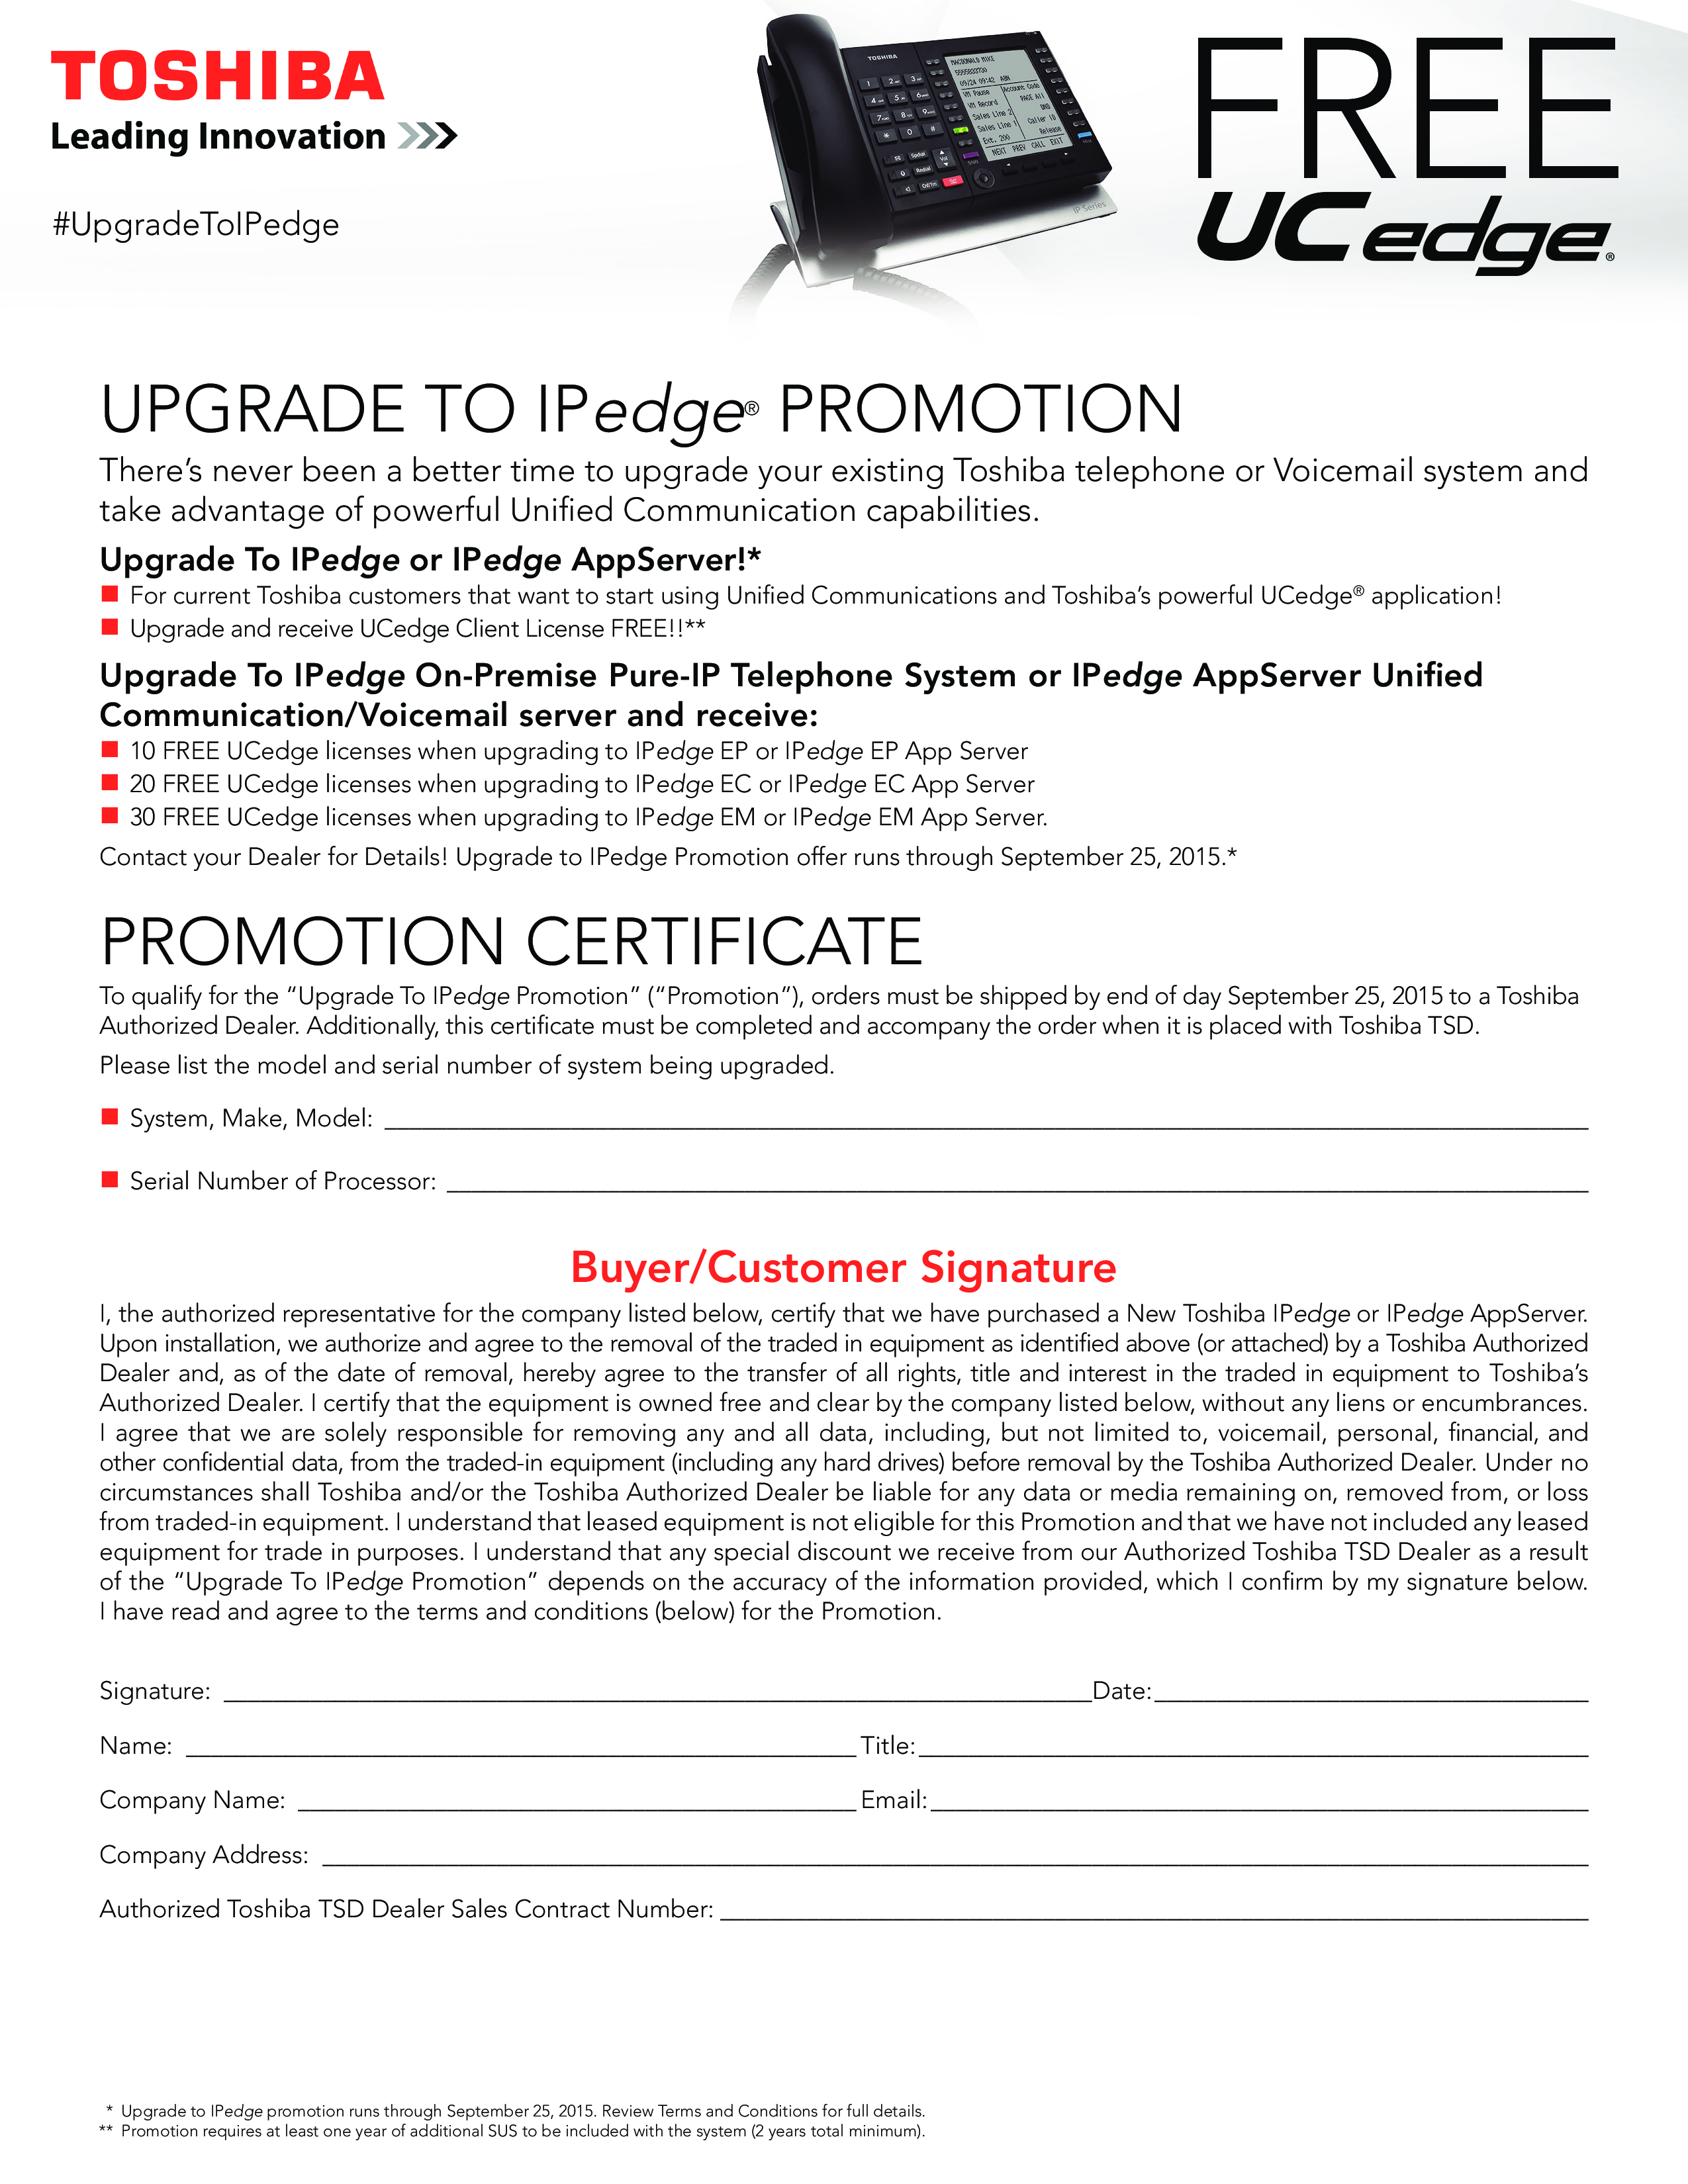 Upgrade To Ipedge Promotion Certificate main image